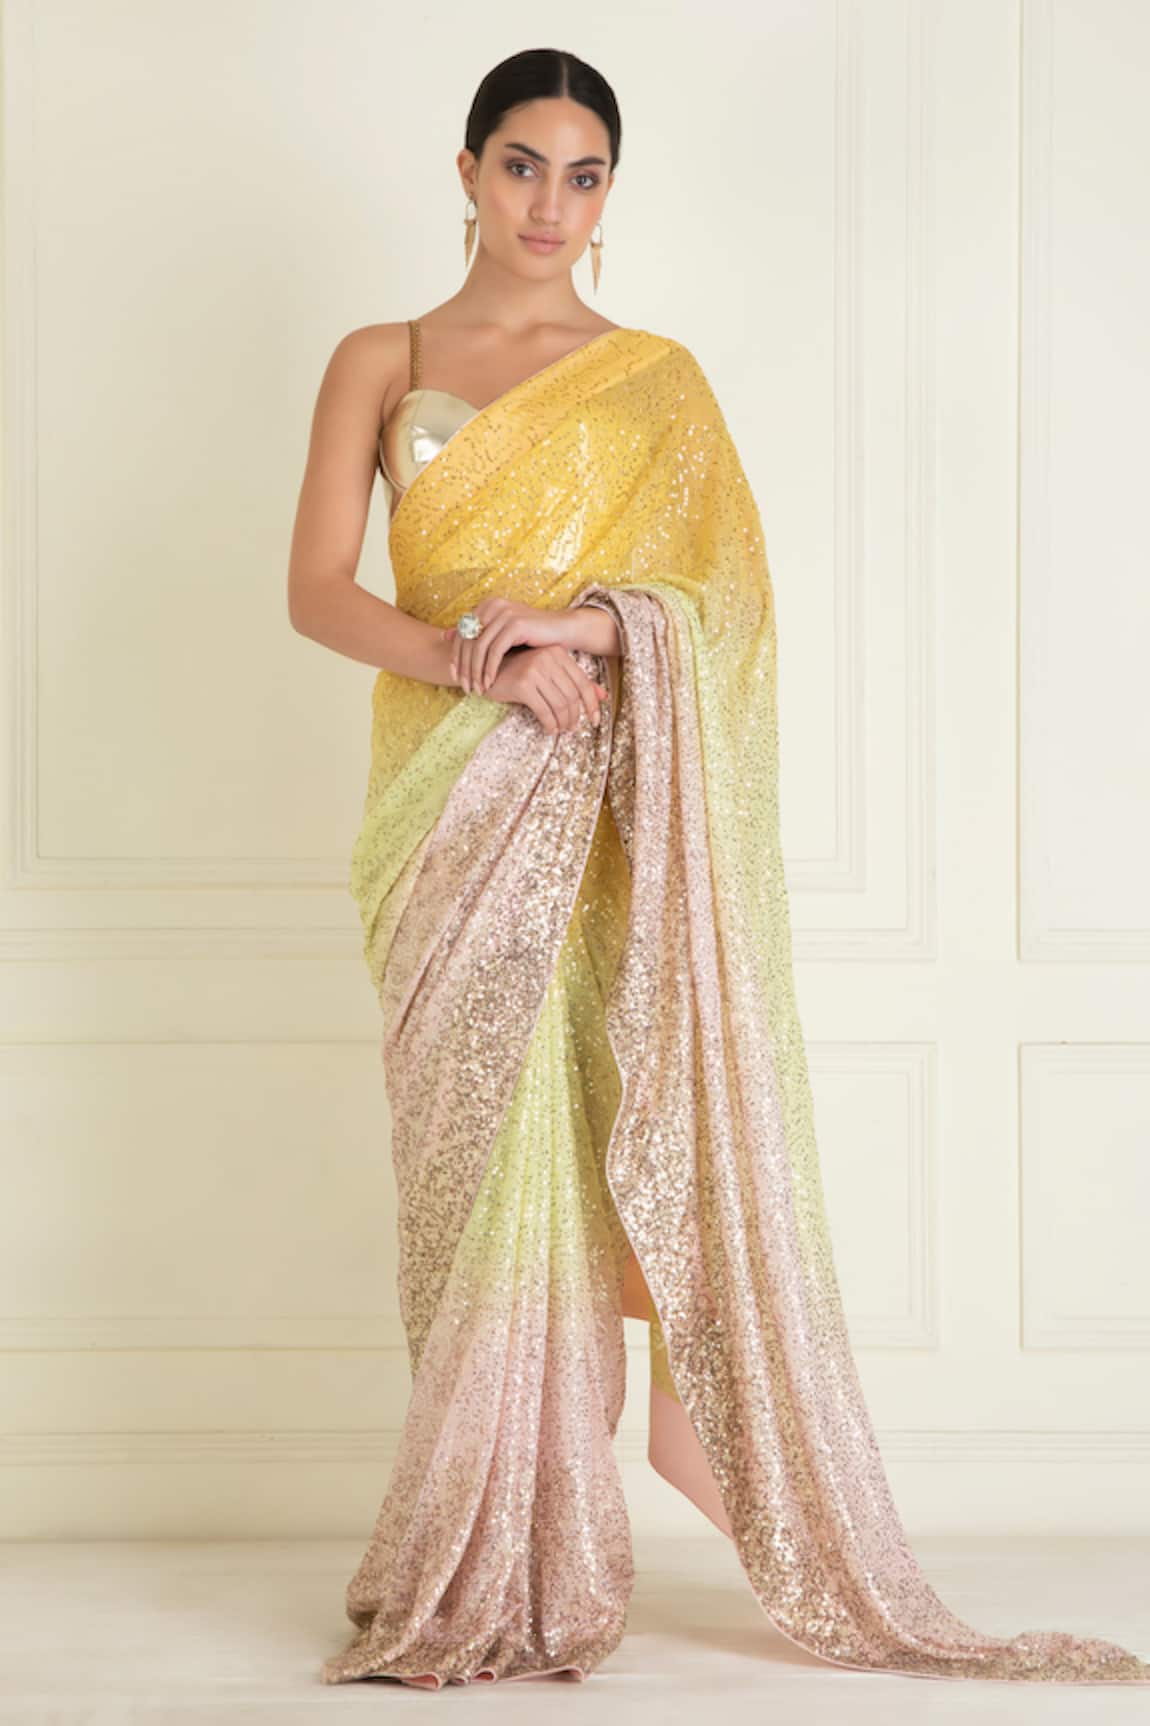 Priyanka Jain Ombre Embroidered Pre-Stitched Saree With Bralette